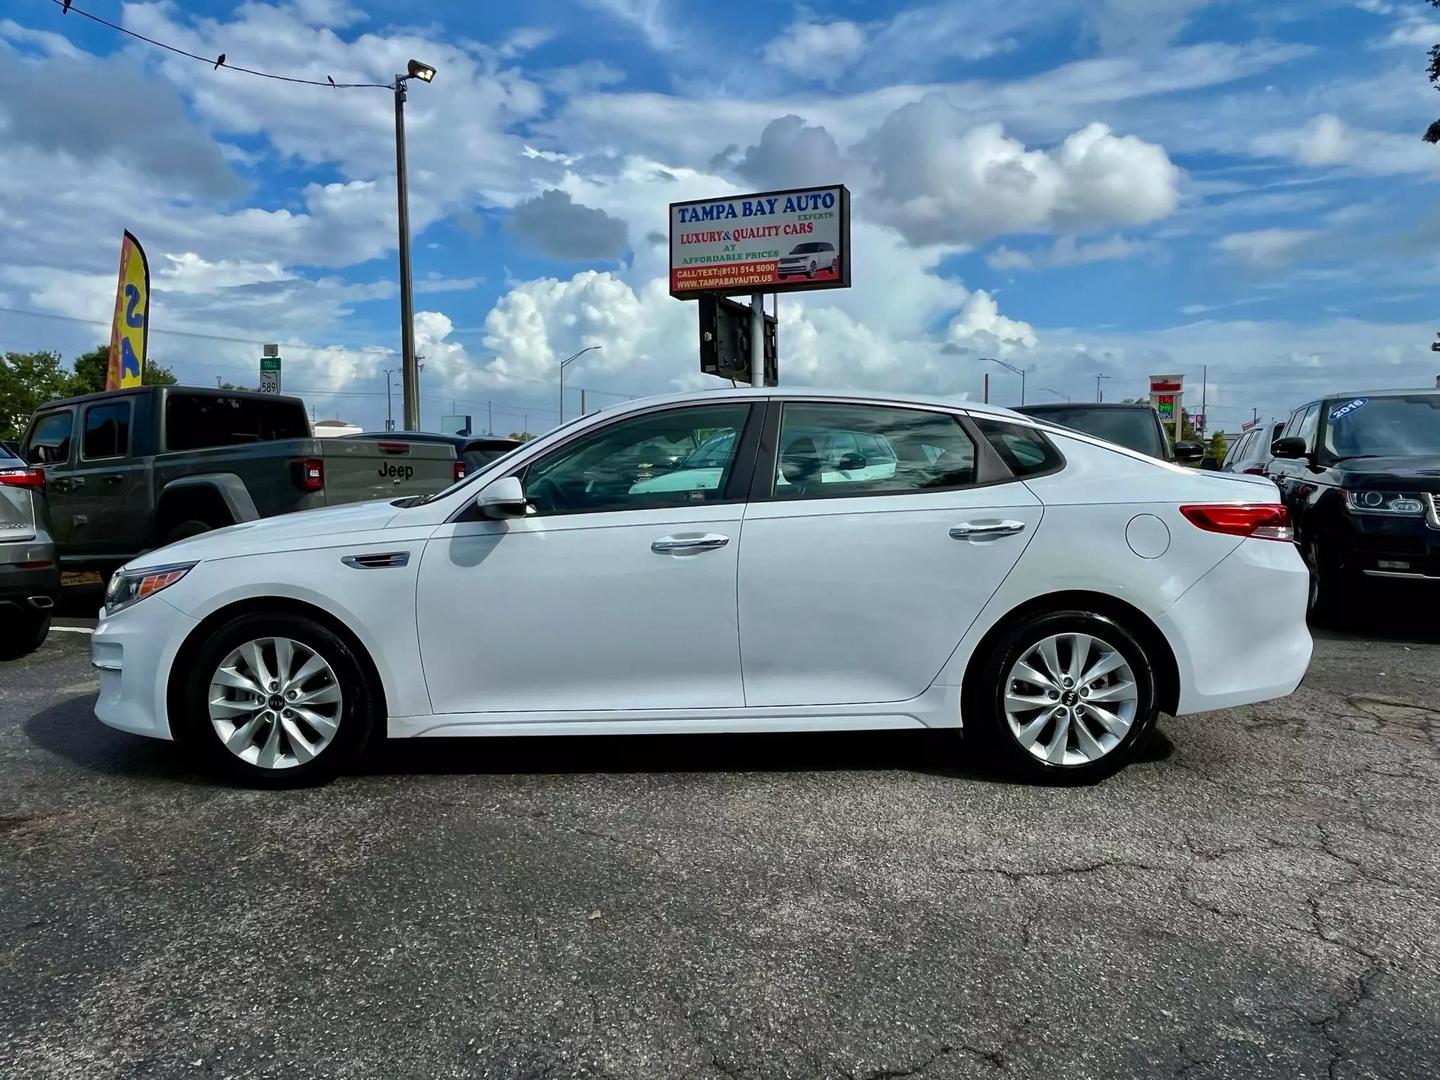 Used 2018 Kia Optima LX with VIN 5XXGT4L39JG272548 for sale in Tampa, FL